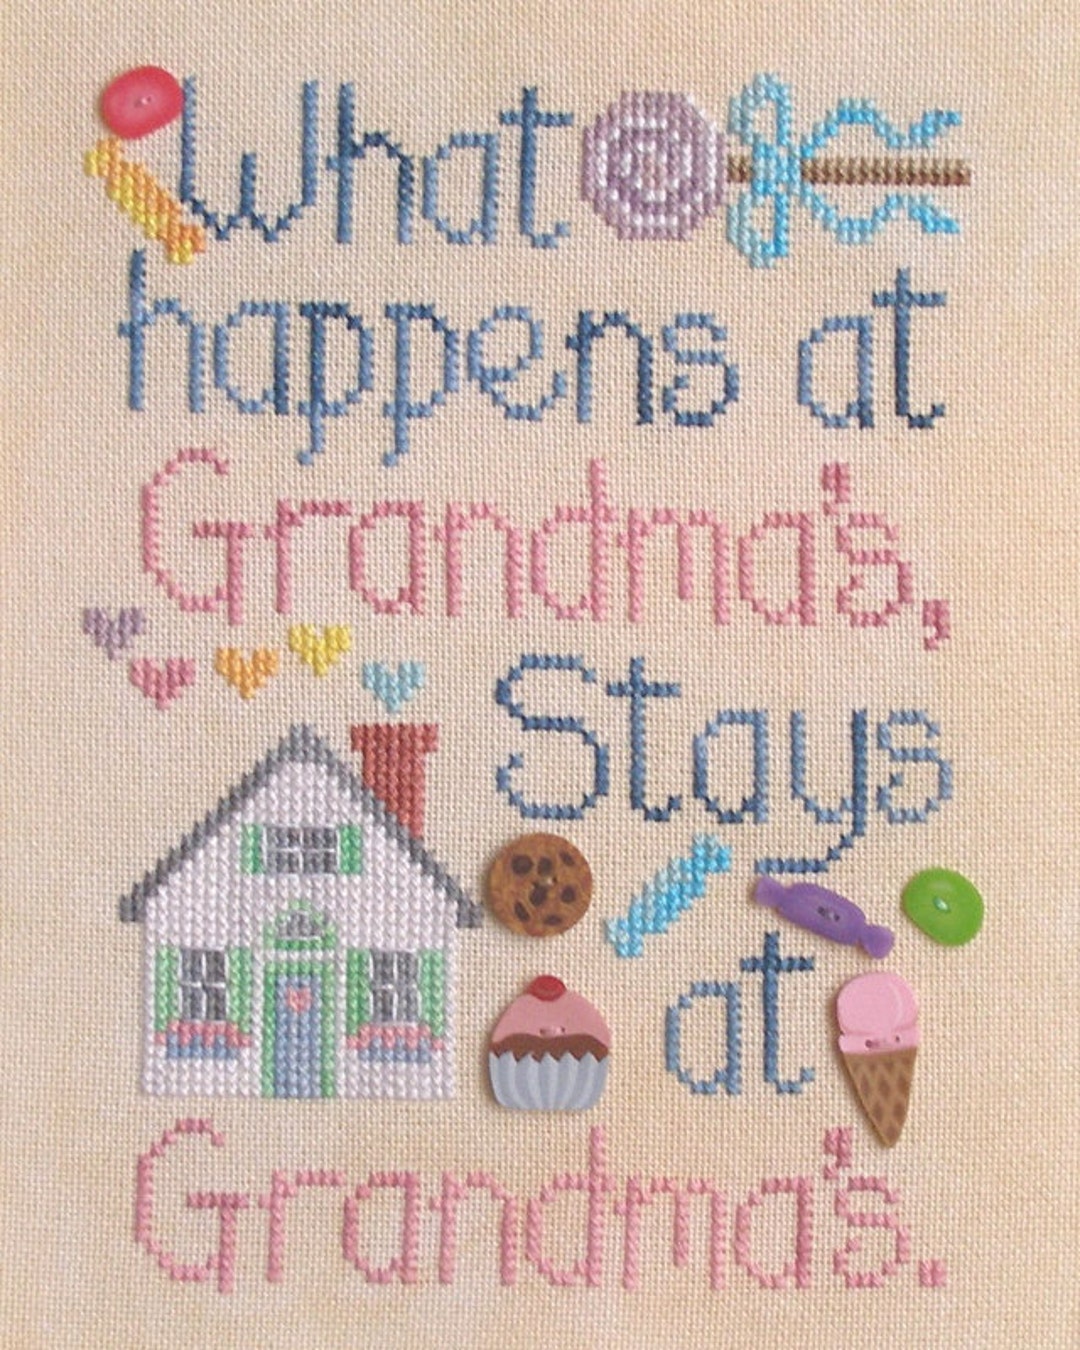 Not Your Grandma's Embroidery Patterns: A Modern Twist on an Old